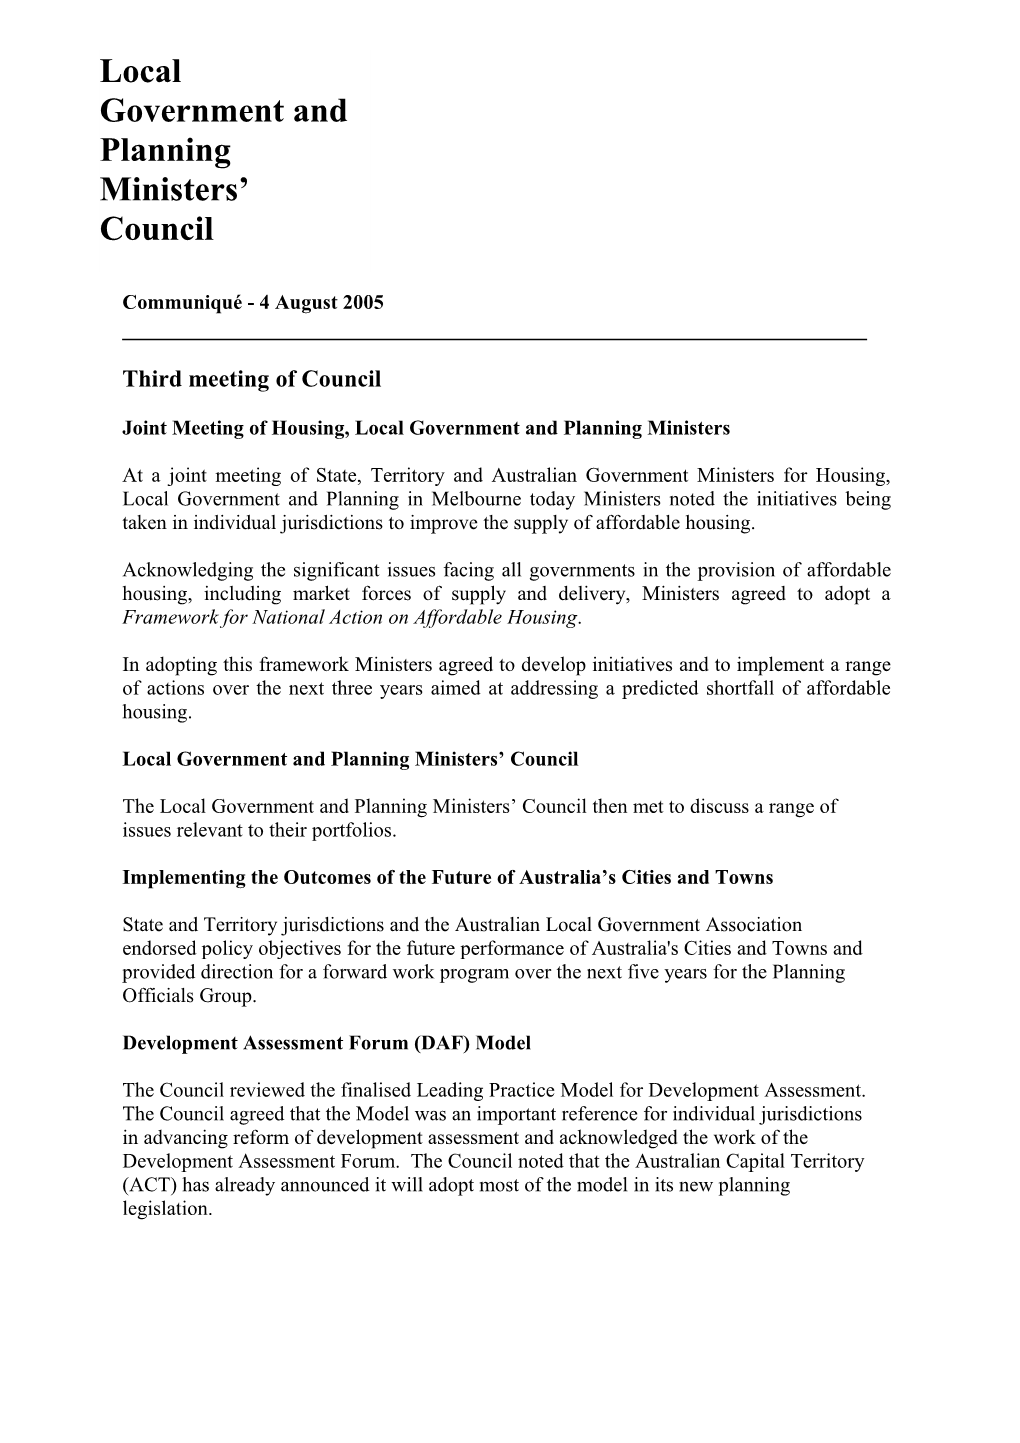 Joint Meeting of Housing, Local Government and Planning Ministers